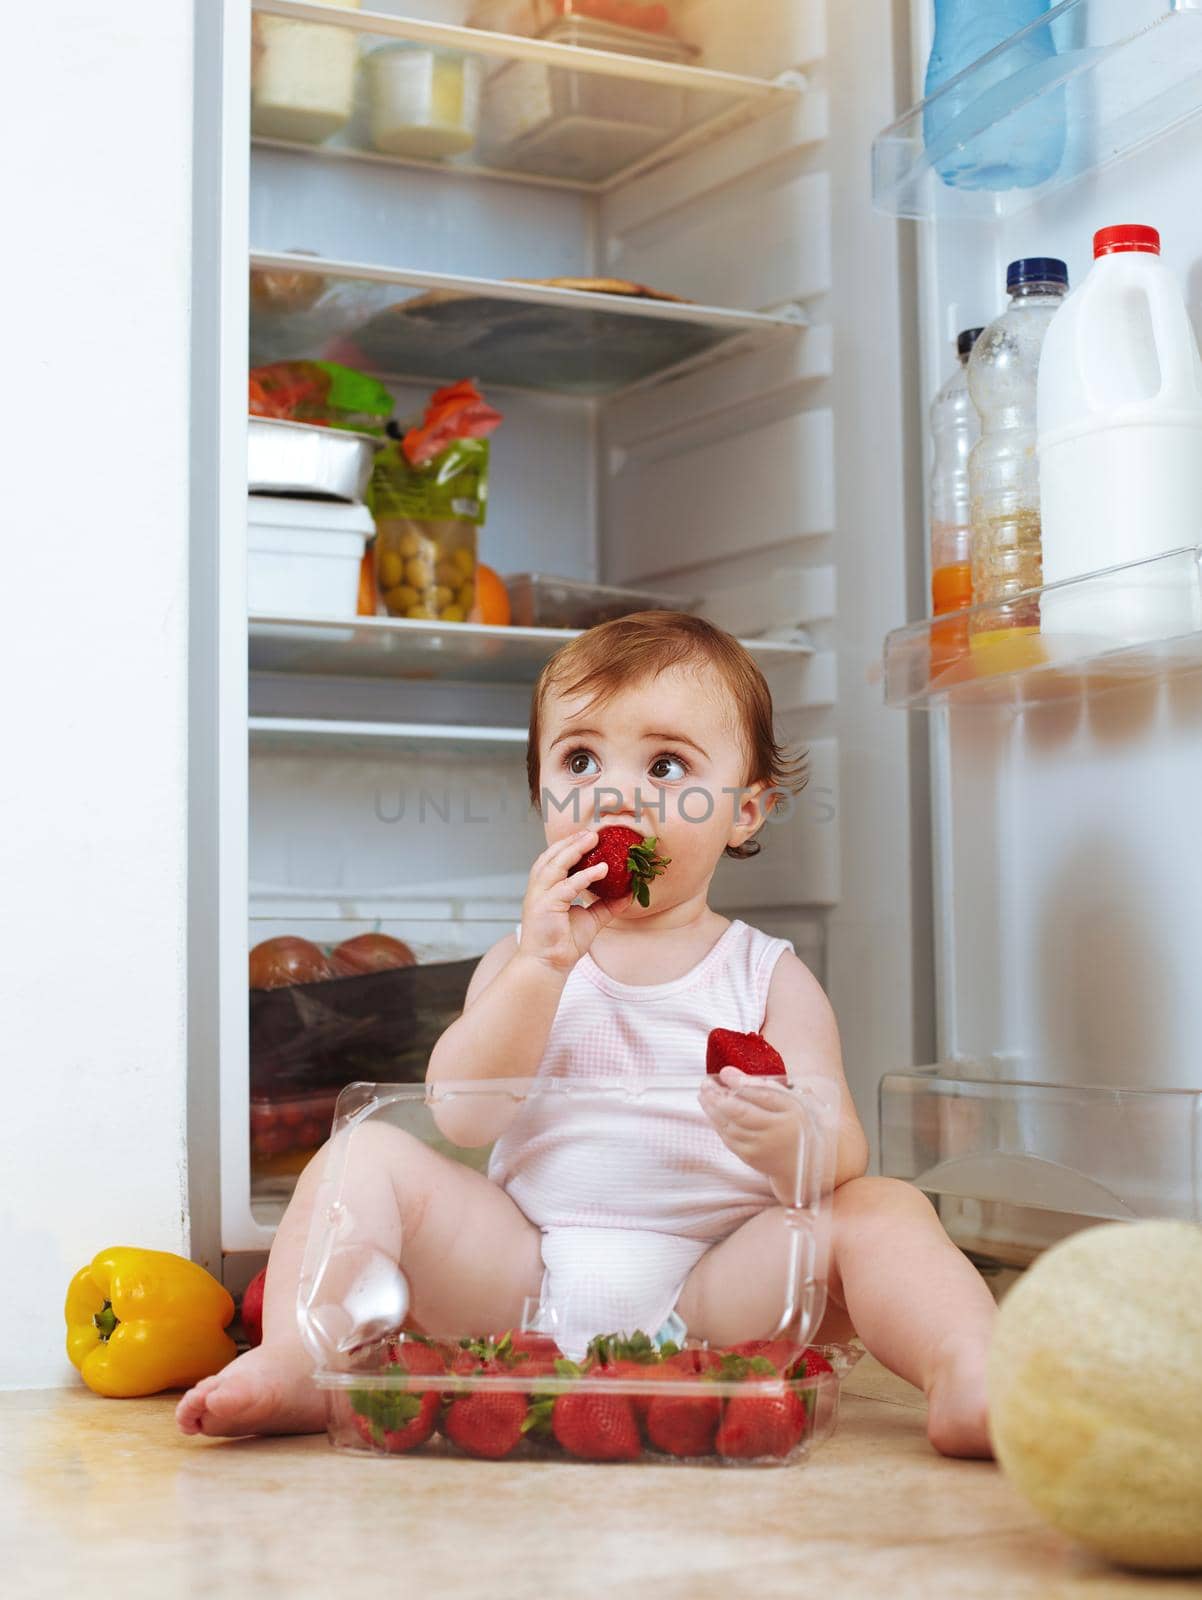 Cant talk. Eating strawberries. Shot of a toddler eating food from the fridge. by YuriArcurs